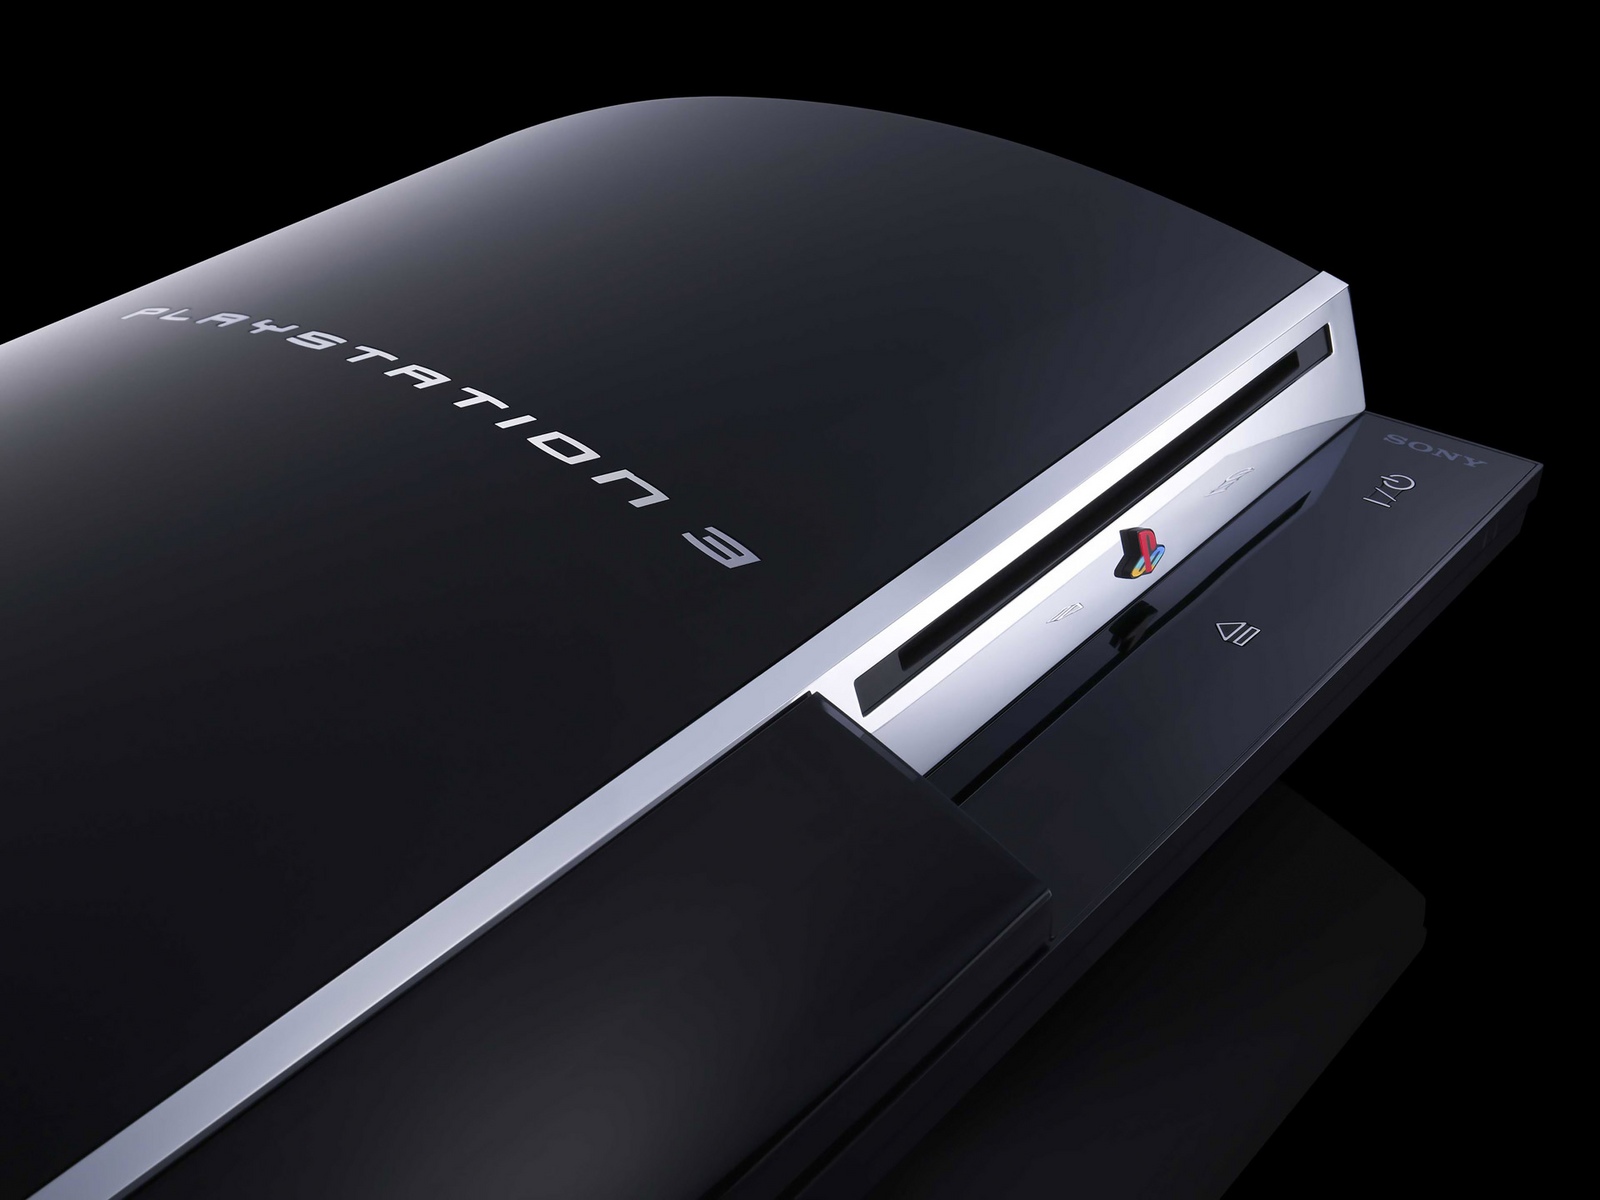 PLAYSTATION 3 Wallpapers HD Wallpapers